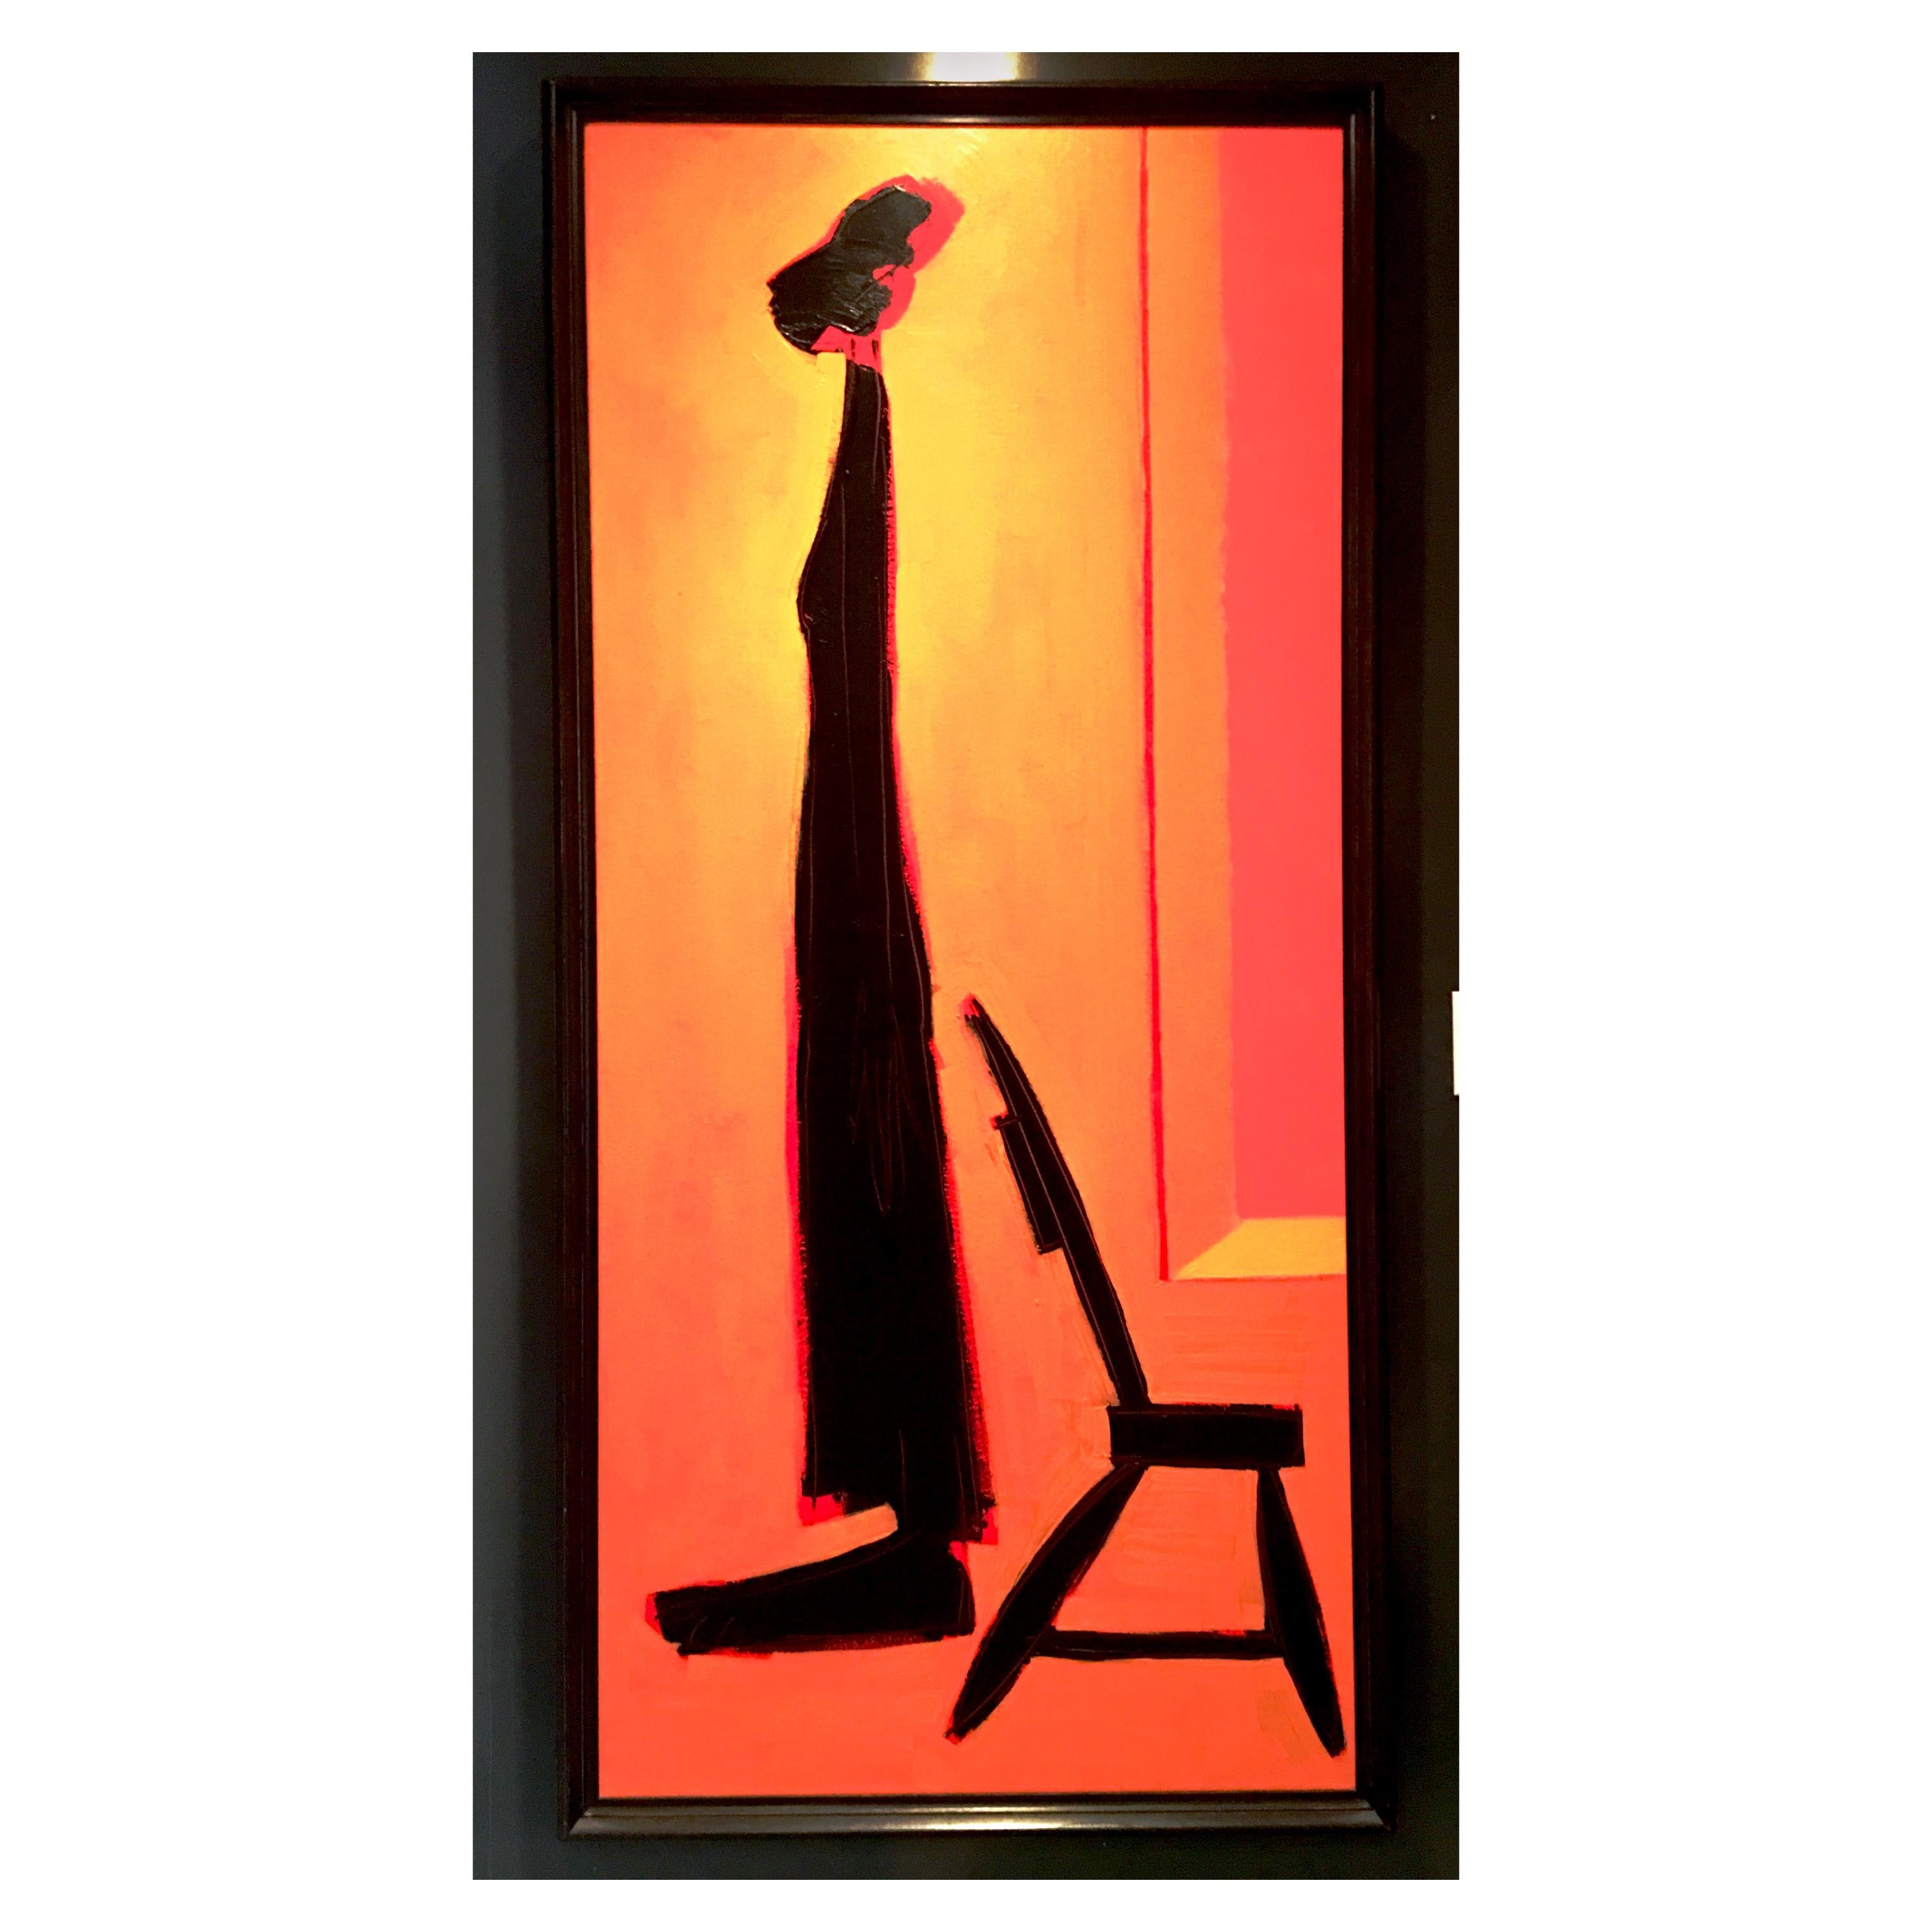 1994 Original Oil on Canvas Life Size Painting "Lady & Chair" by, Alan Weinstein For Sale